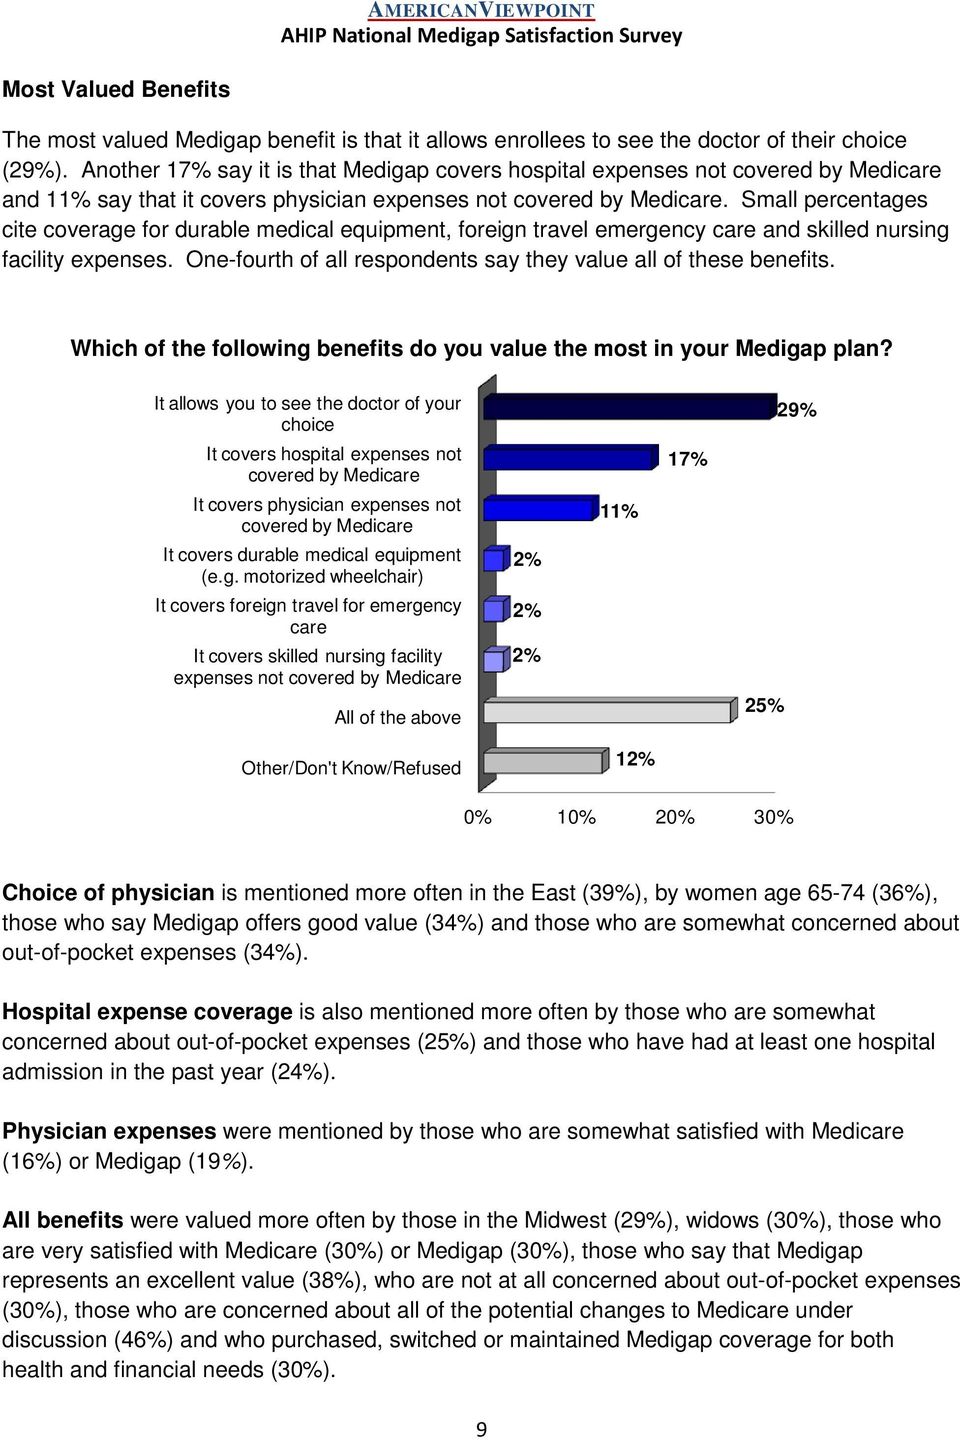 Small percentages cite coverage for durable medical equipment, foreign travel emergency care and skilled nursing facility expenses. One-fourth of all respondents say they value all of these benefits.